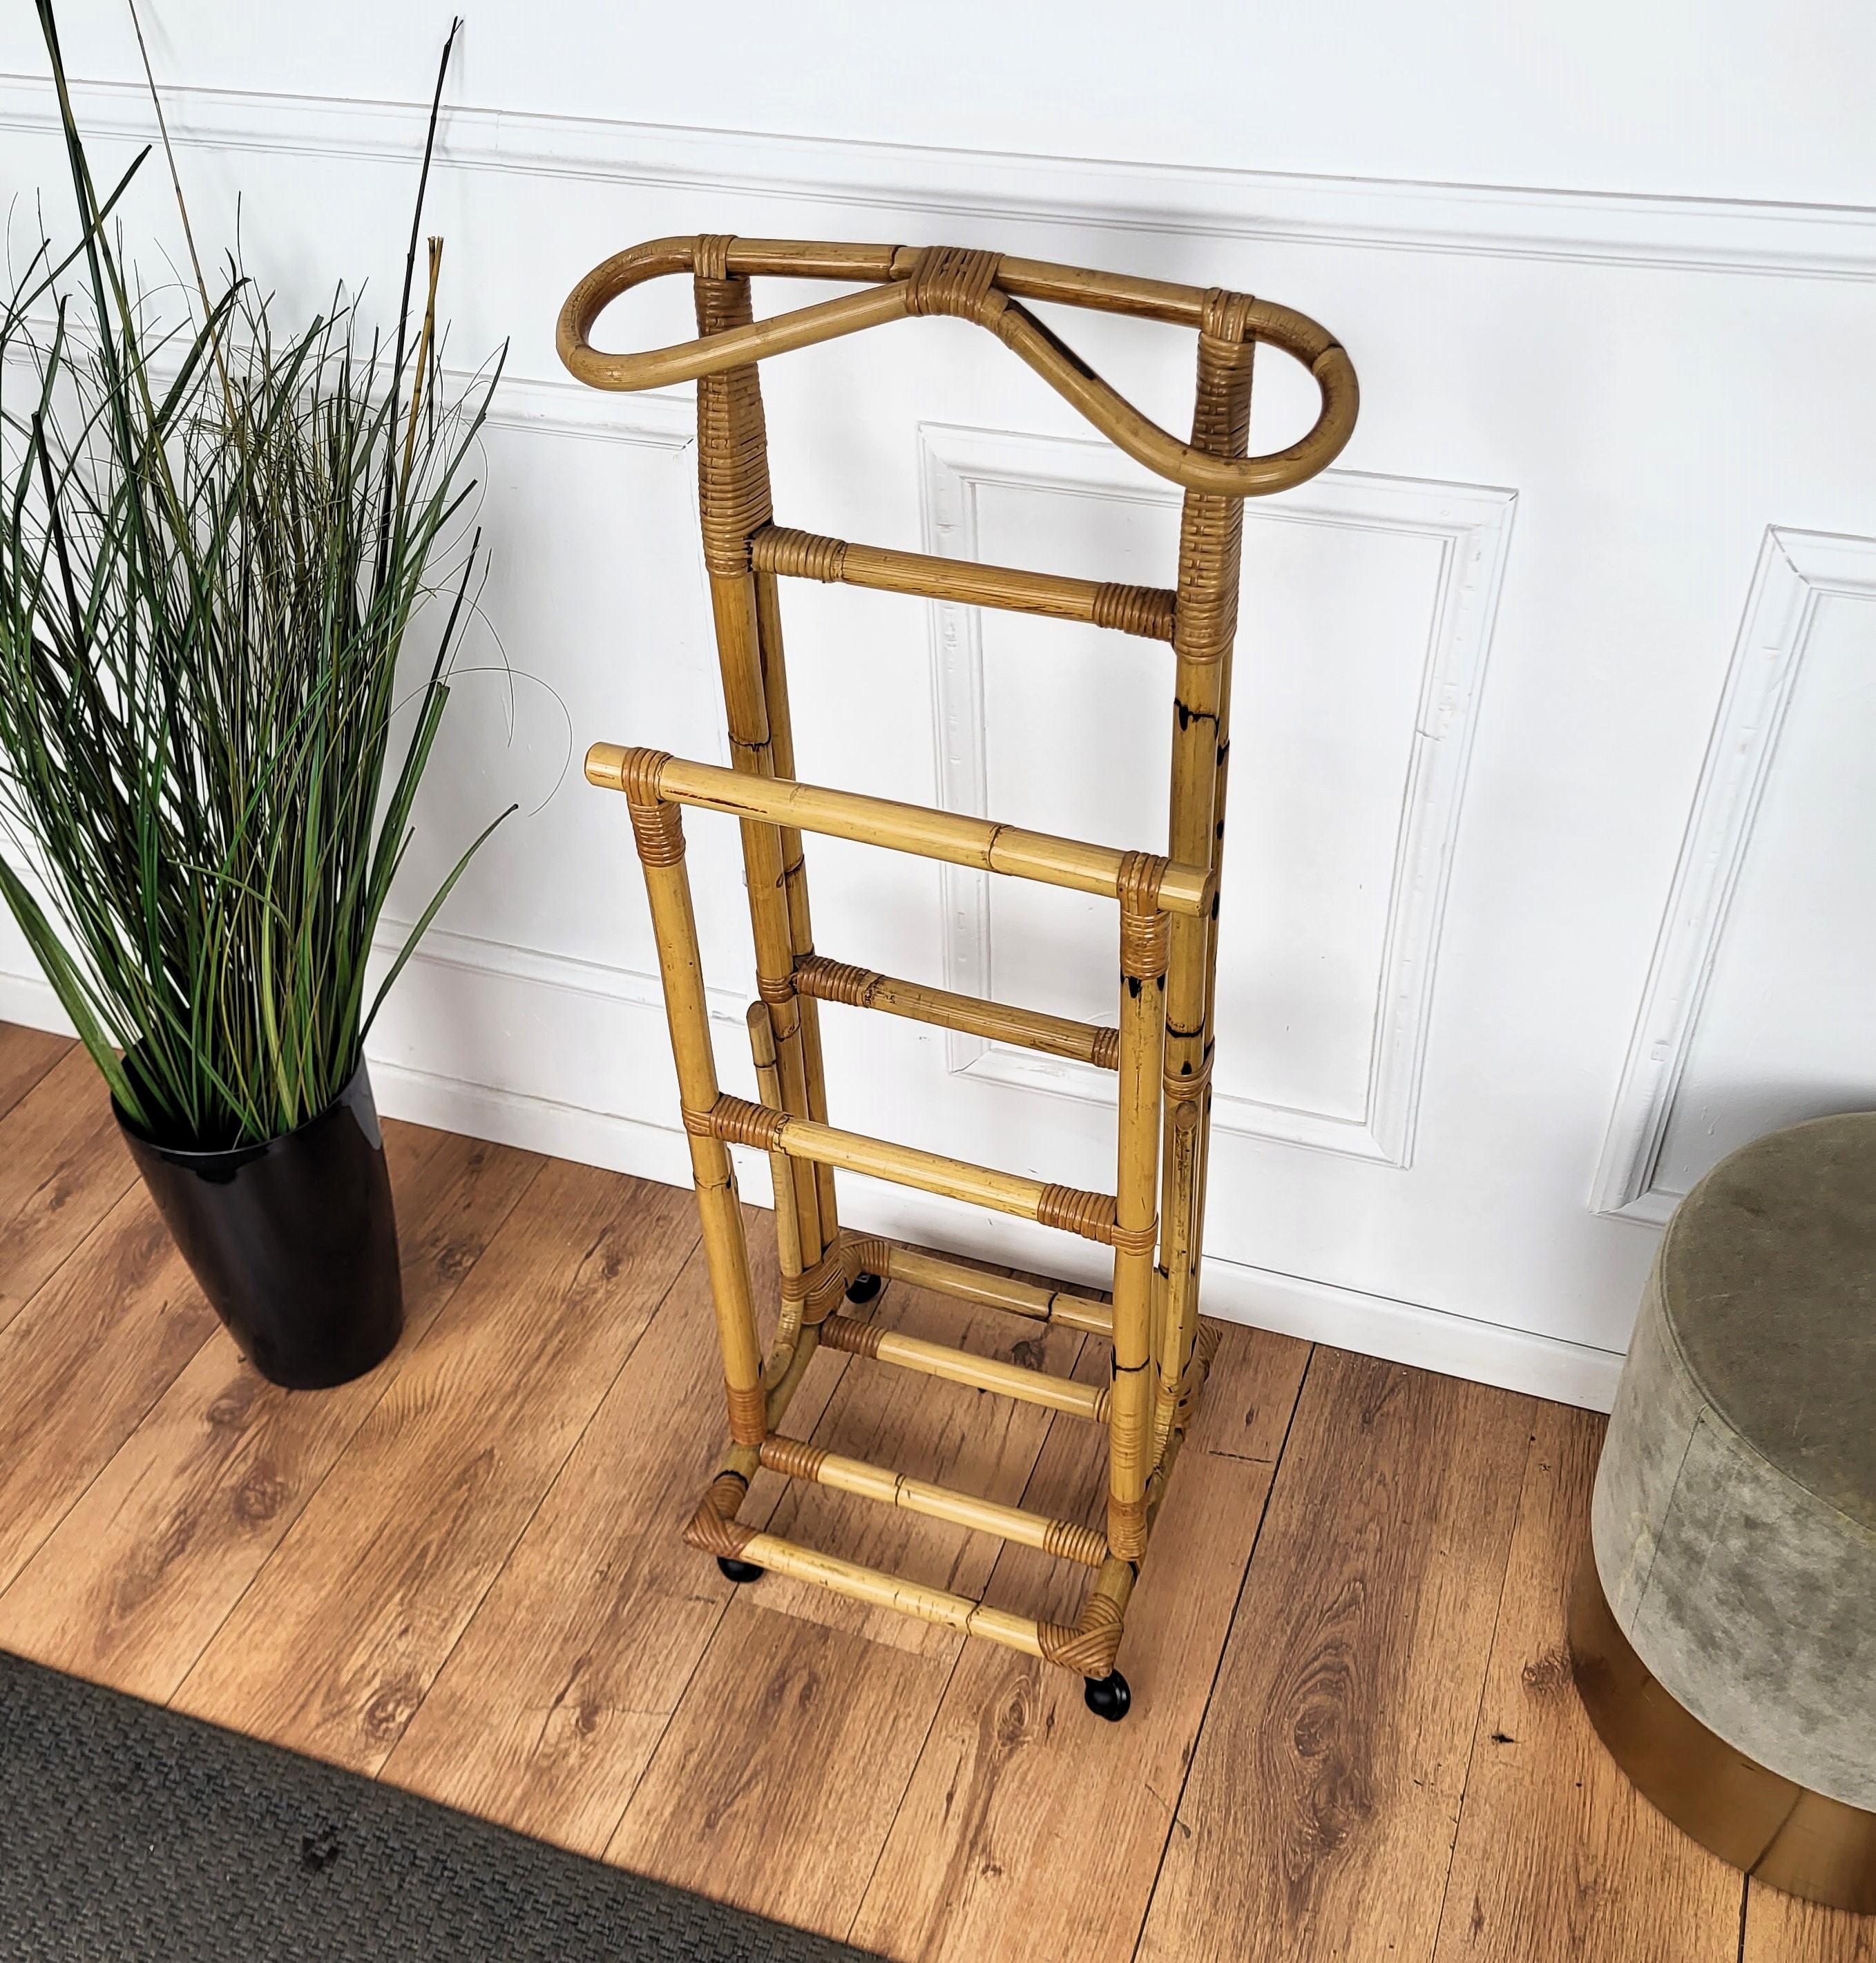 Beautiful 1960s Italian Mid-Century Modern Vintage 1970s dressboy valet stand, with classic carved column and pedestals completed by the fine and elegant 4 small wheels. Easy to carry. Perfect to add style and character in any bedroom or bathroom.